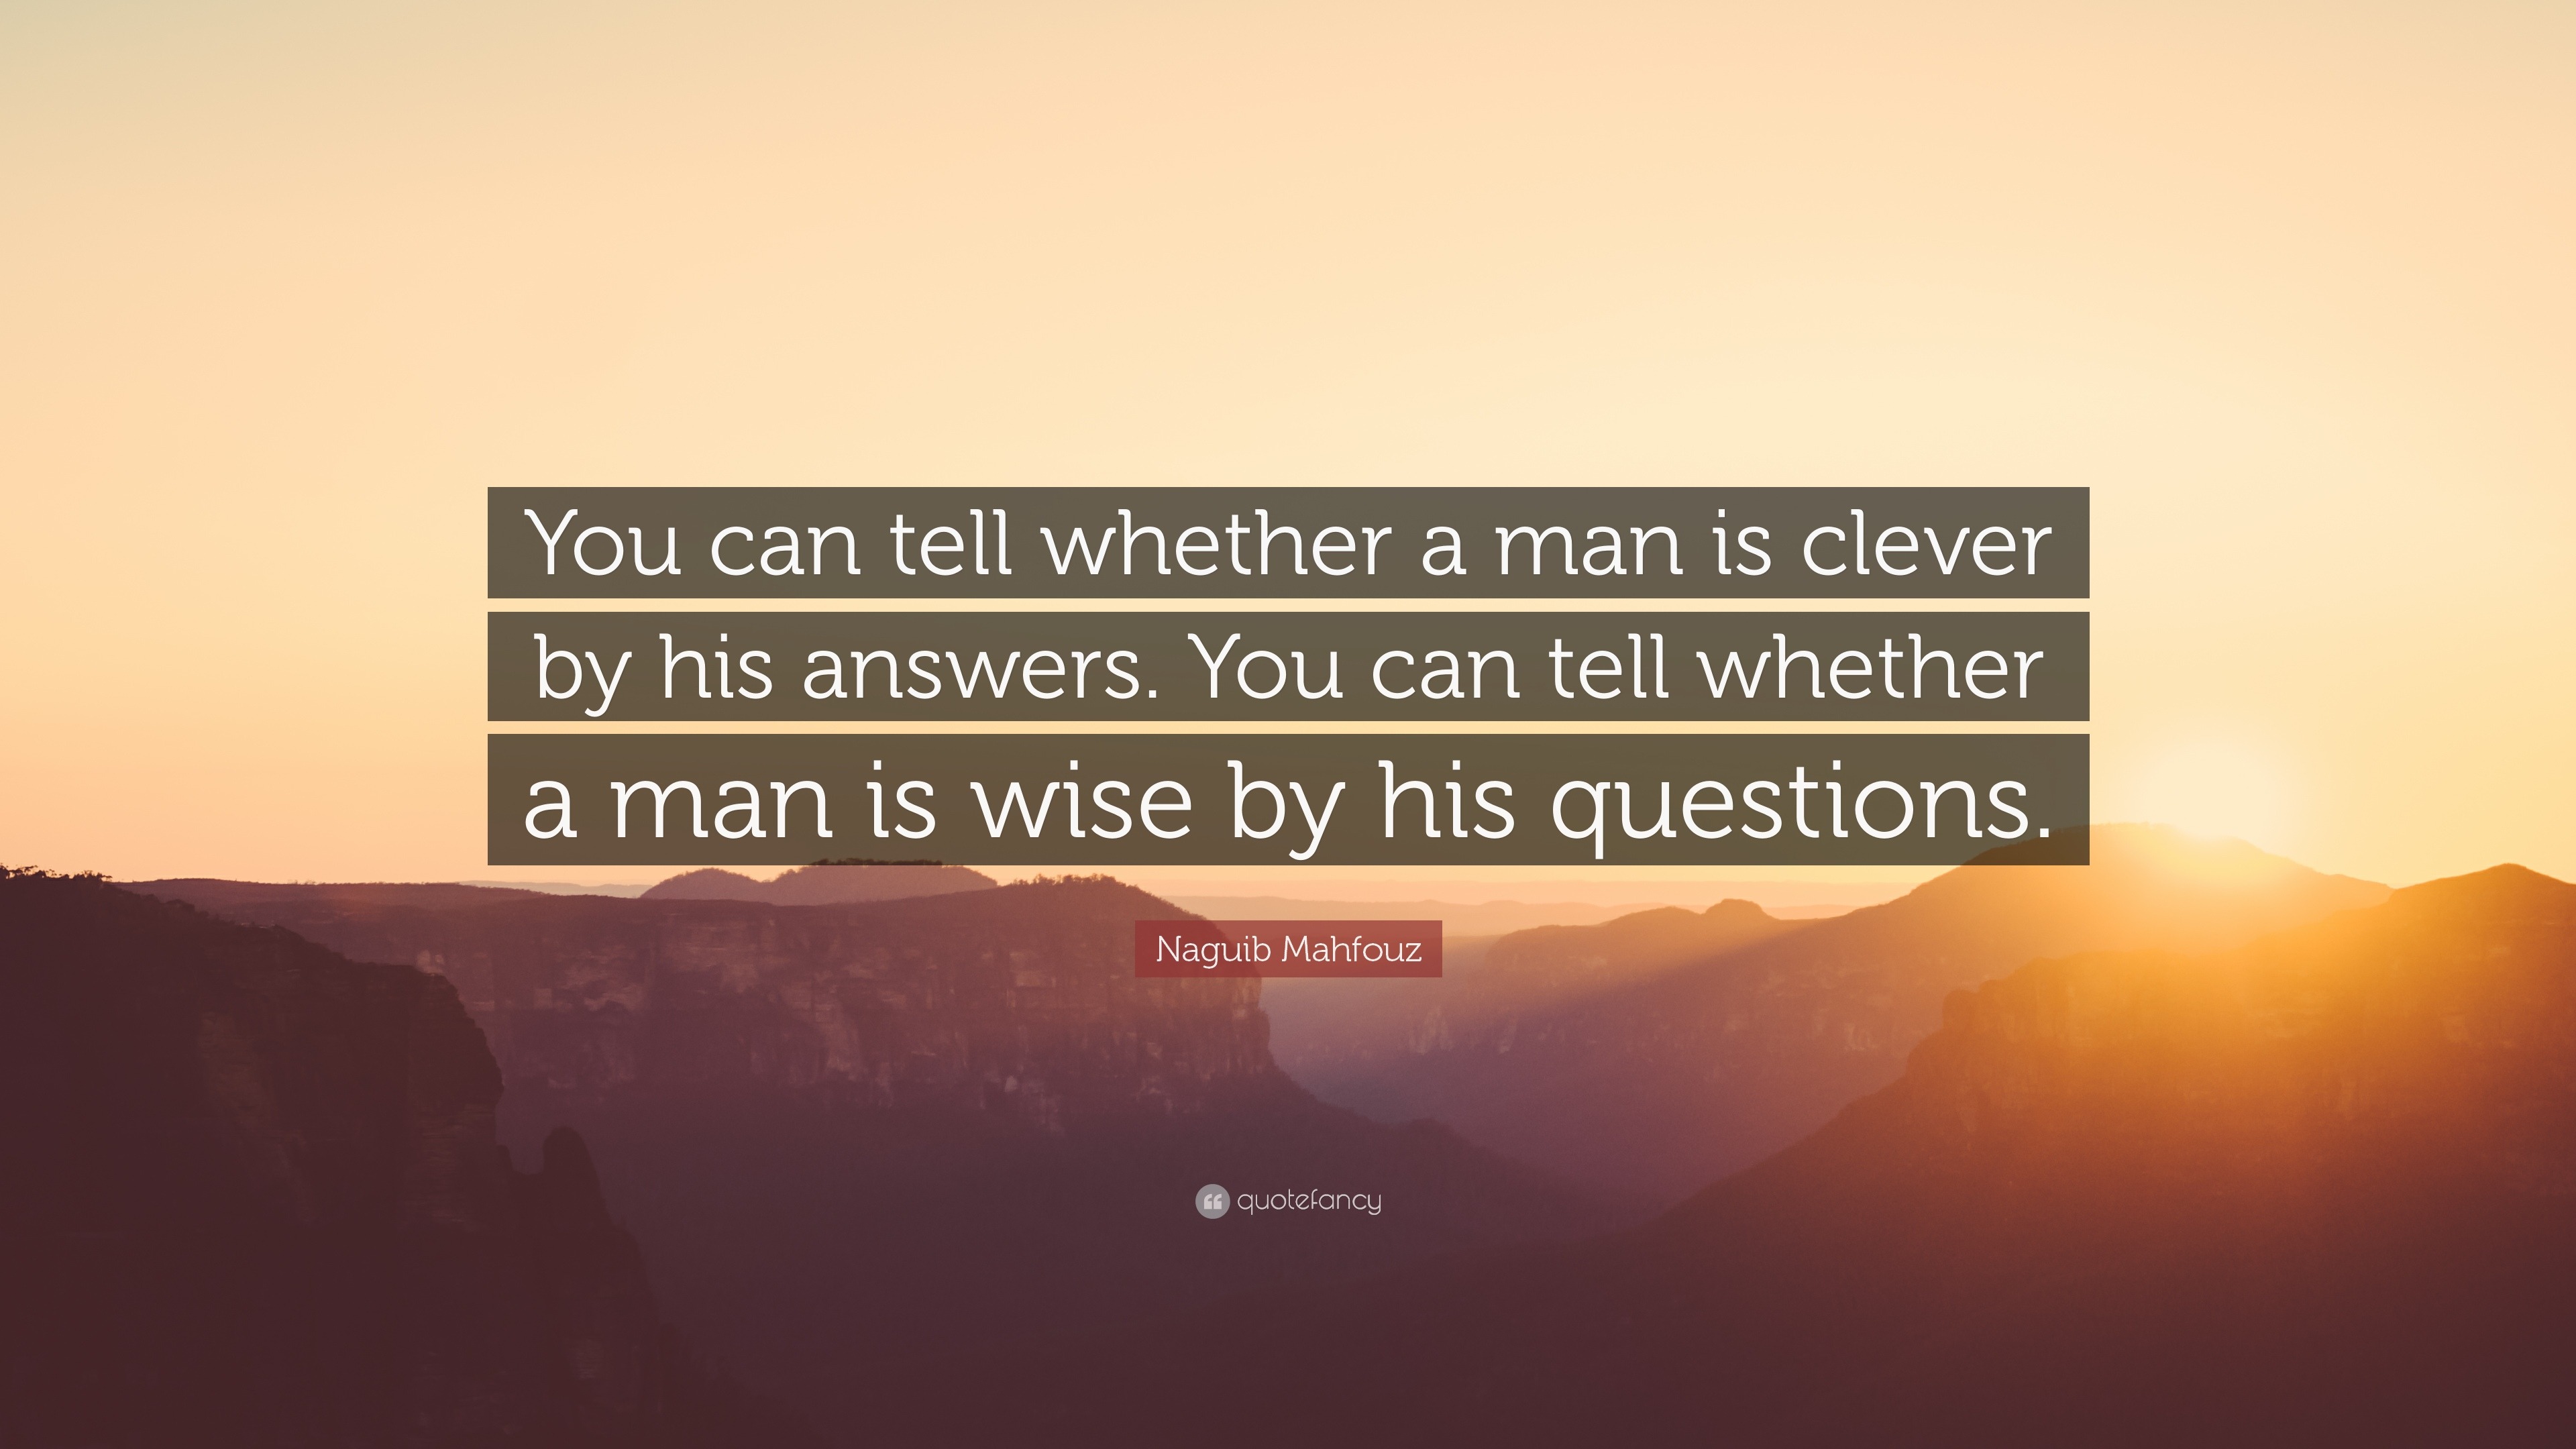 Naguib Mahfouz Quote: “You can tell whether a man is clever by his